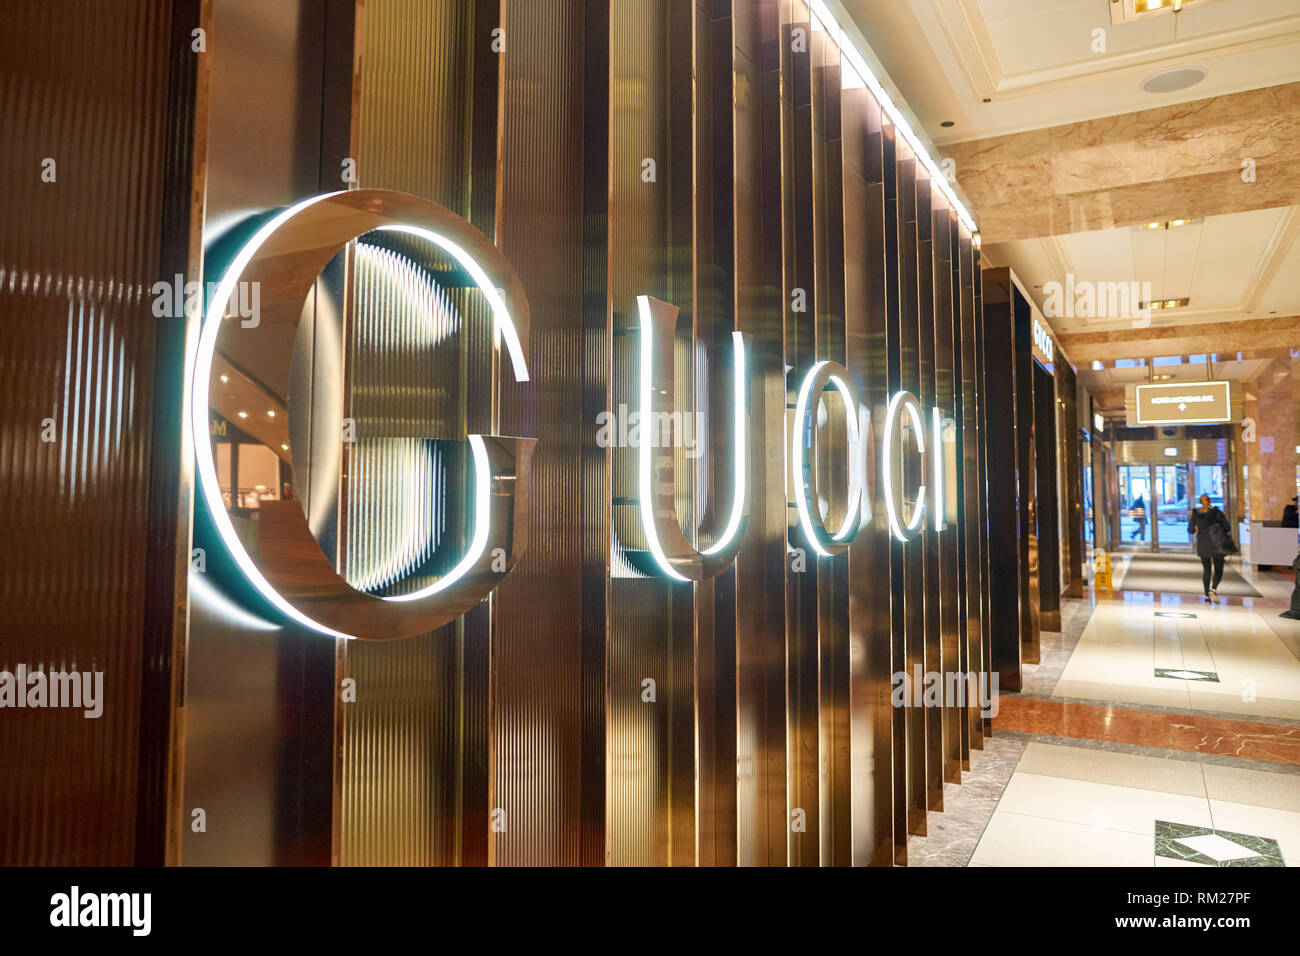 CHICAGO, IL - 04 APRIL, 2016: Gucci store at 900 North Michigan, Chicago.  Gucci is an Italian luxury brand of fashion and leather goods Stock Photo -  Alamy